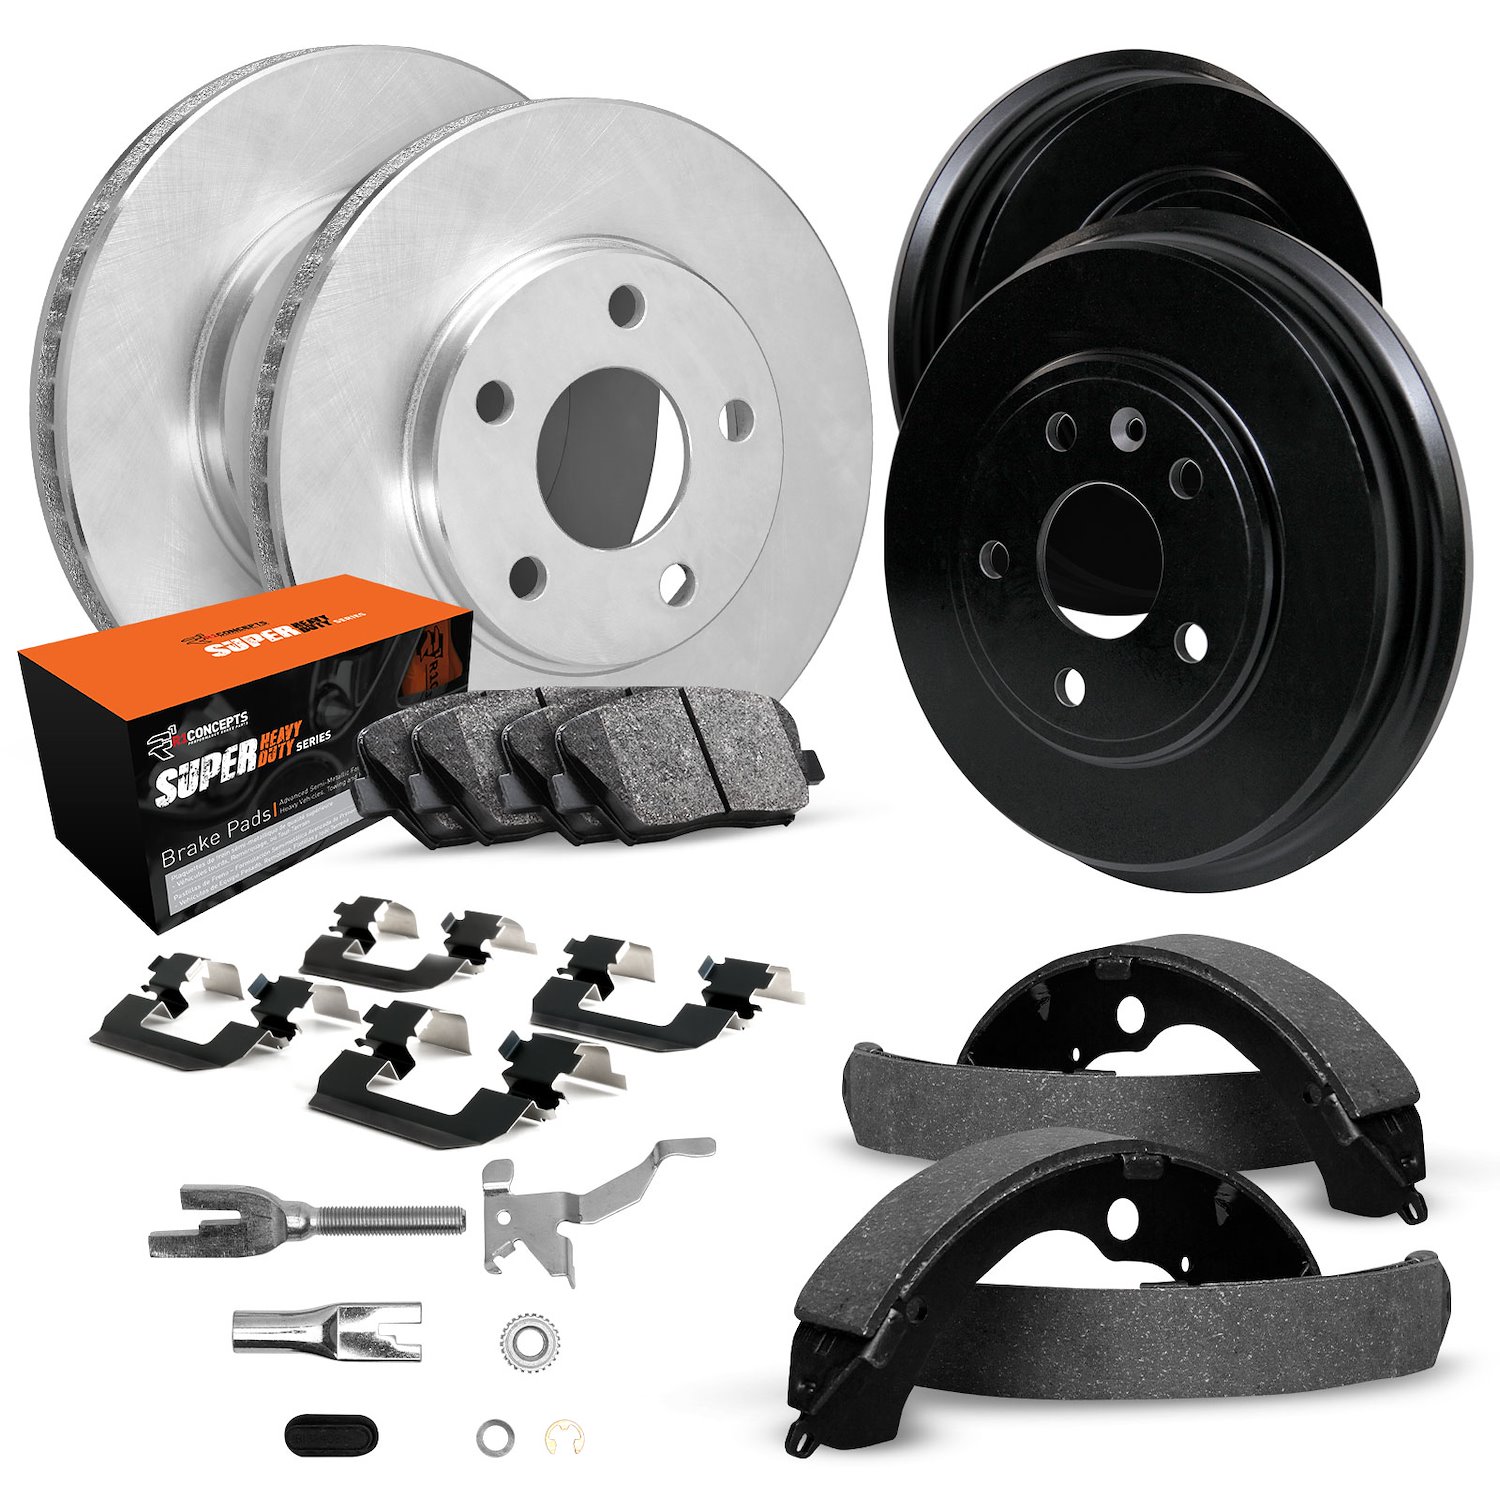 E-Line Blank Brake Rotor & Drum Set w/Super-Duty Pads, Shoes, Hardware, & Adjusters, 1992-1993 Ford/Lincoln/Mercury/Mazda